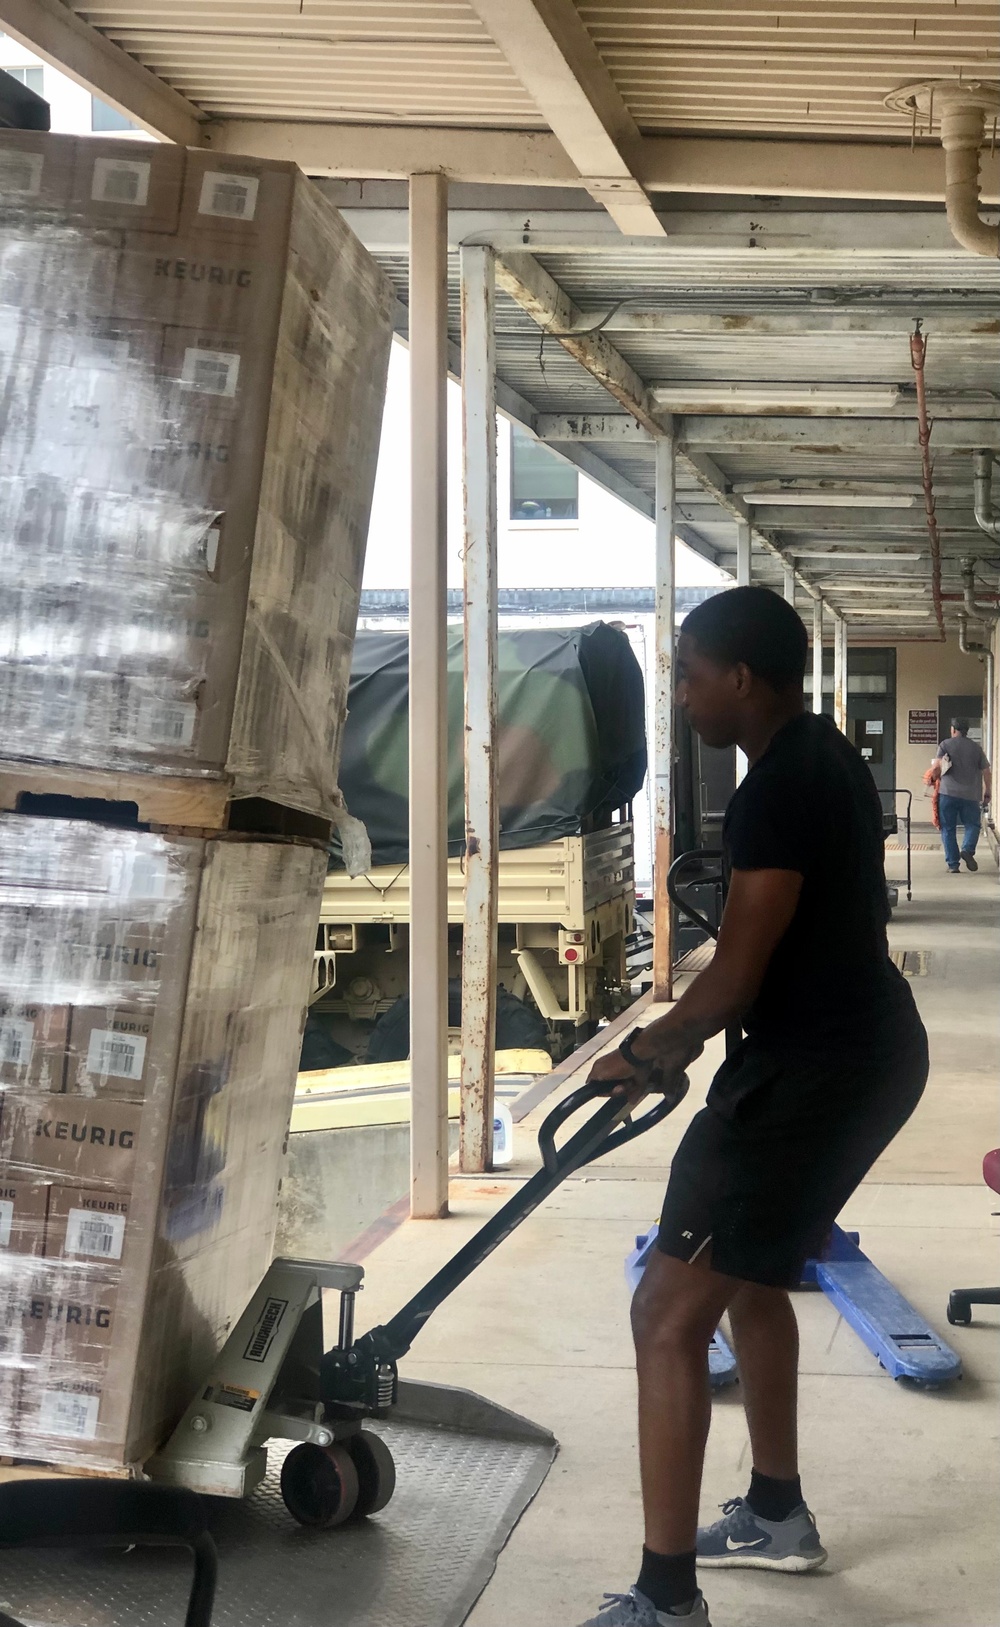 Spc. Andre Thomas helps move pallets